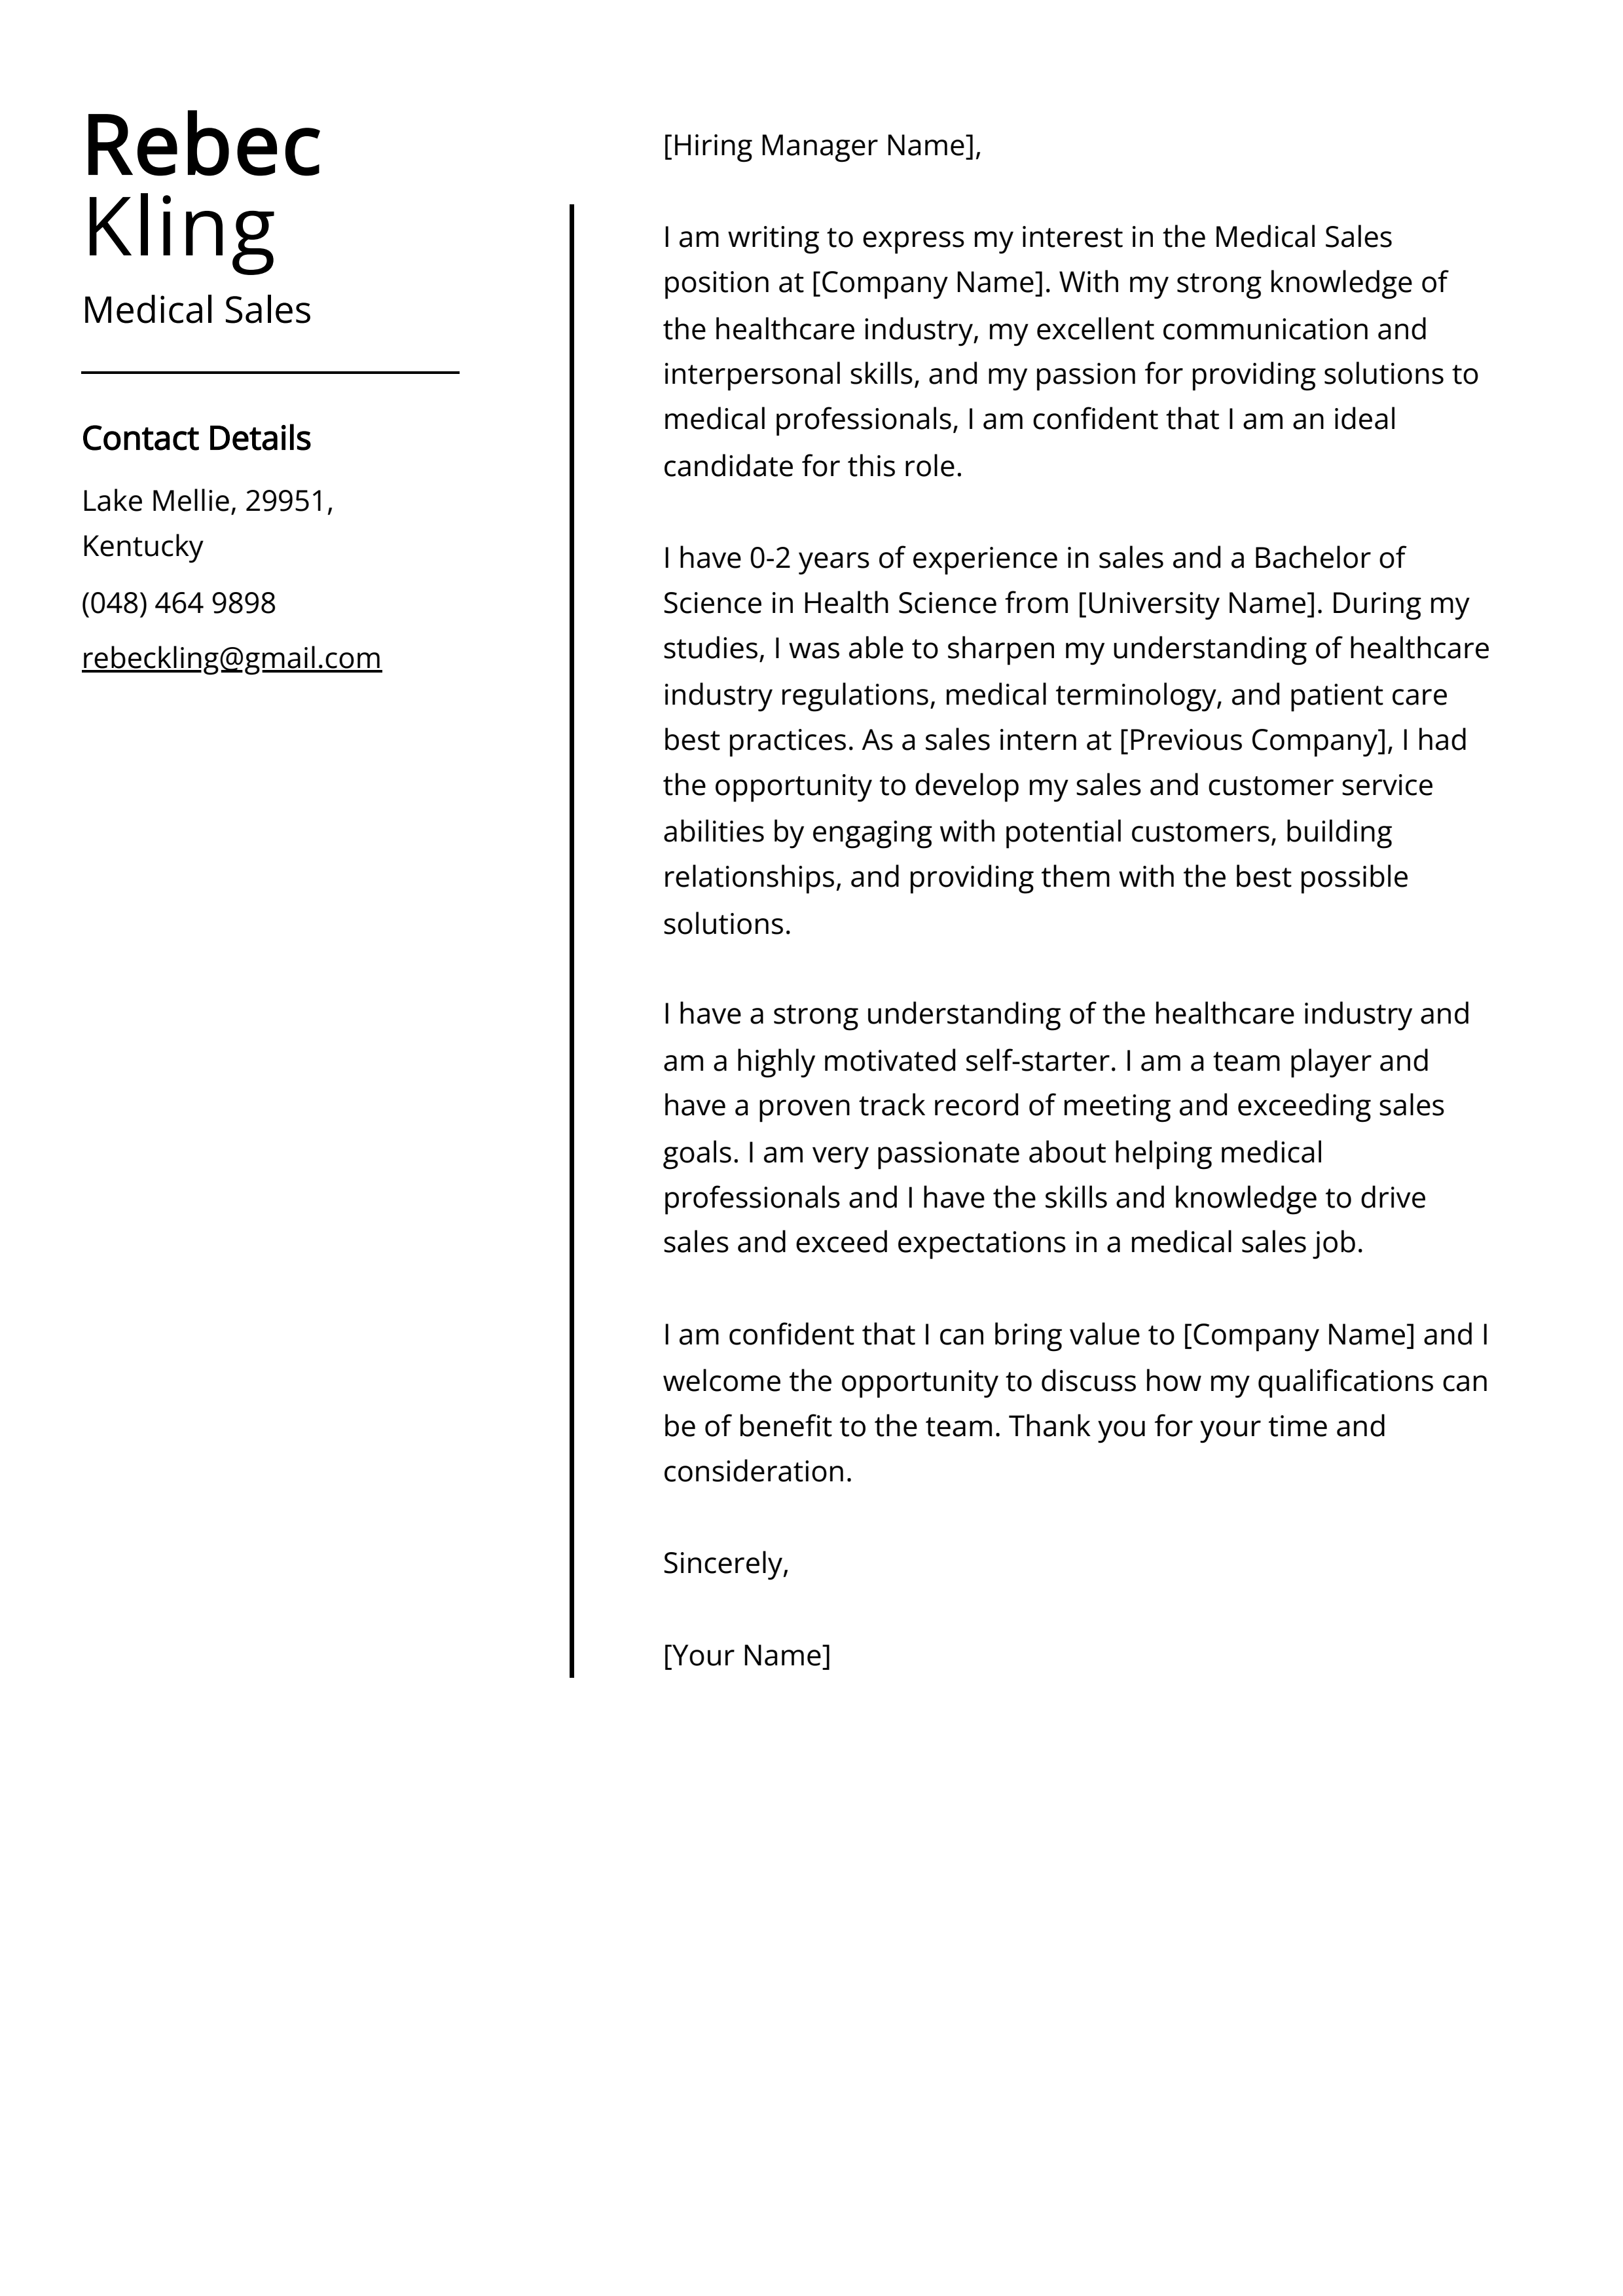 Medical Sales Cover Letter Example